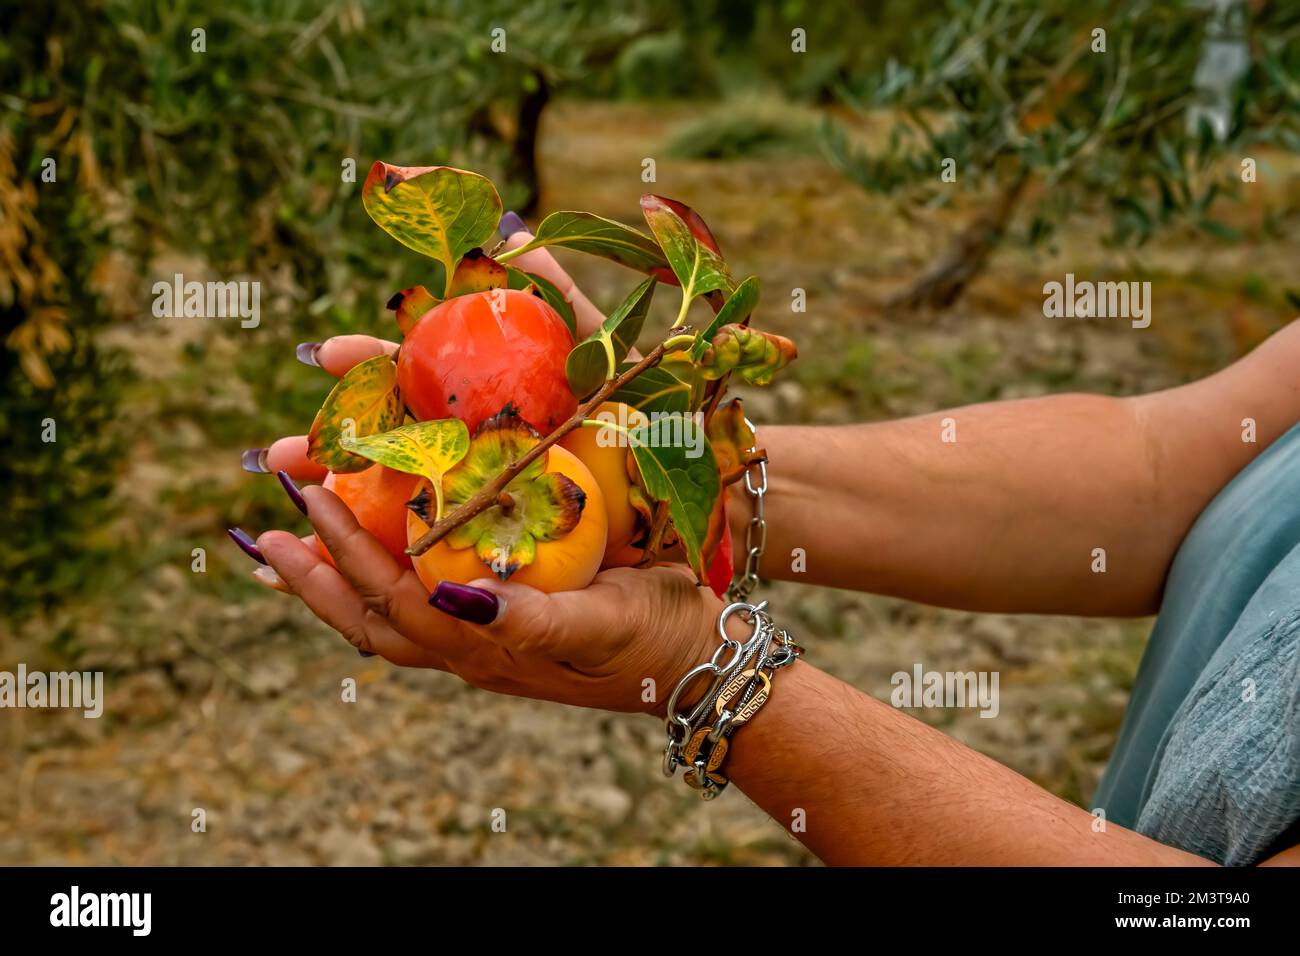 Woman's hands picking the ripe persimmon fruit hanging from the tree branch Stock Photo